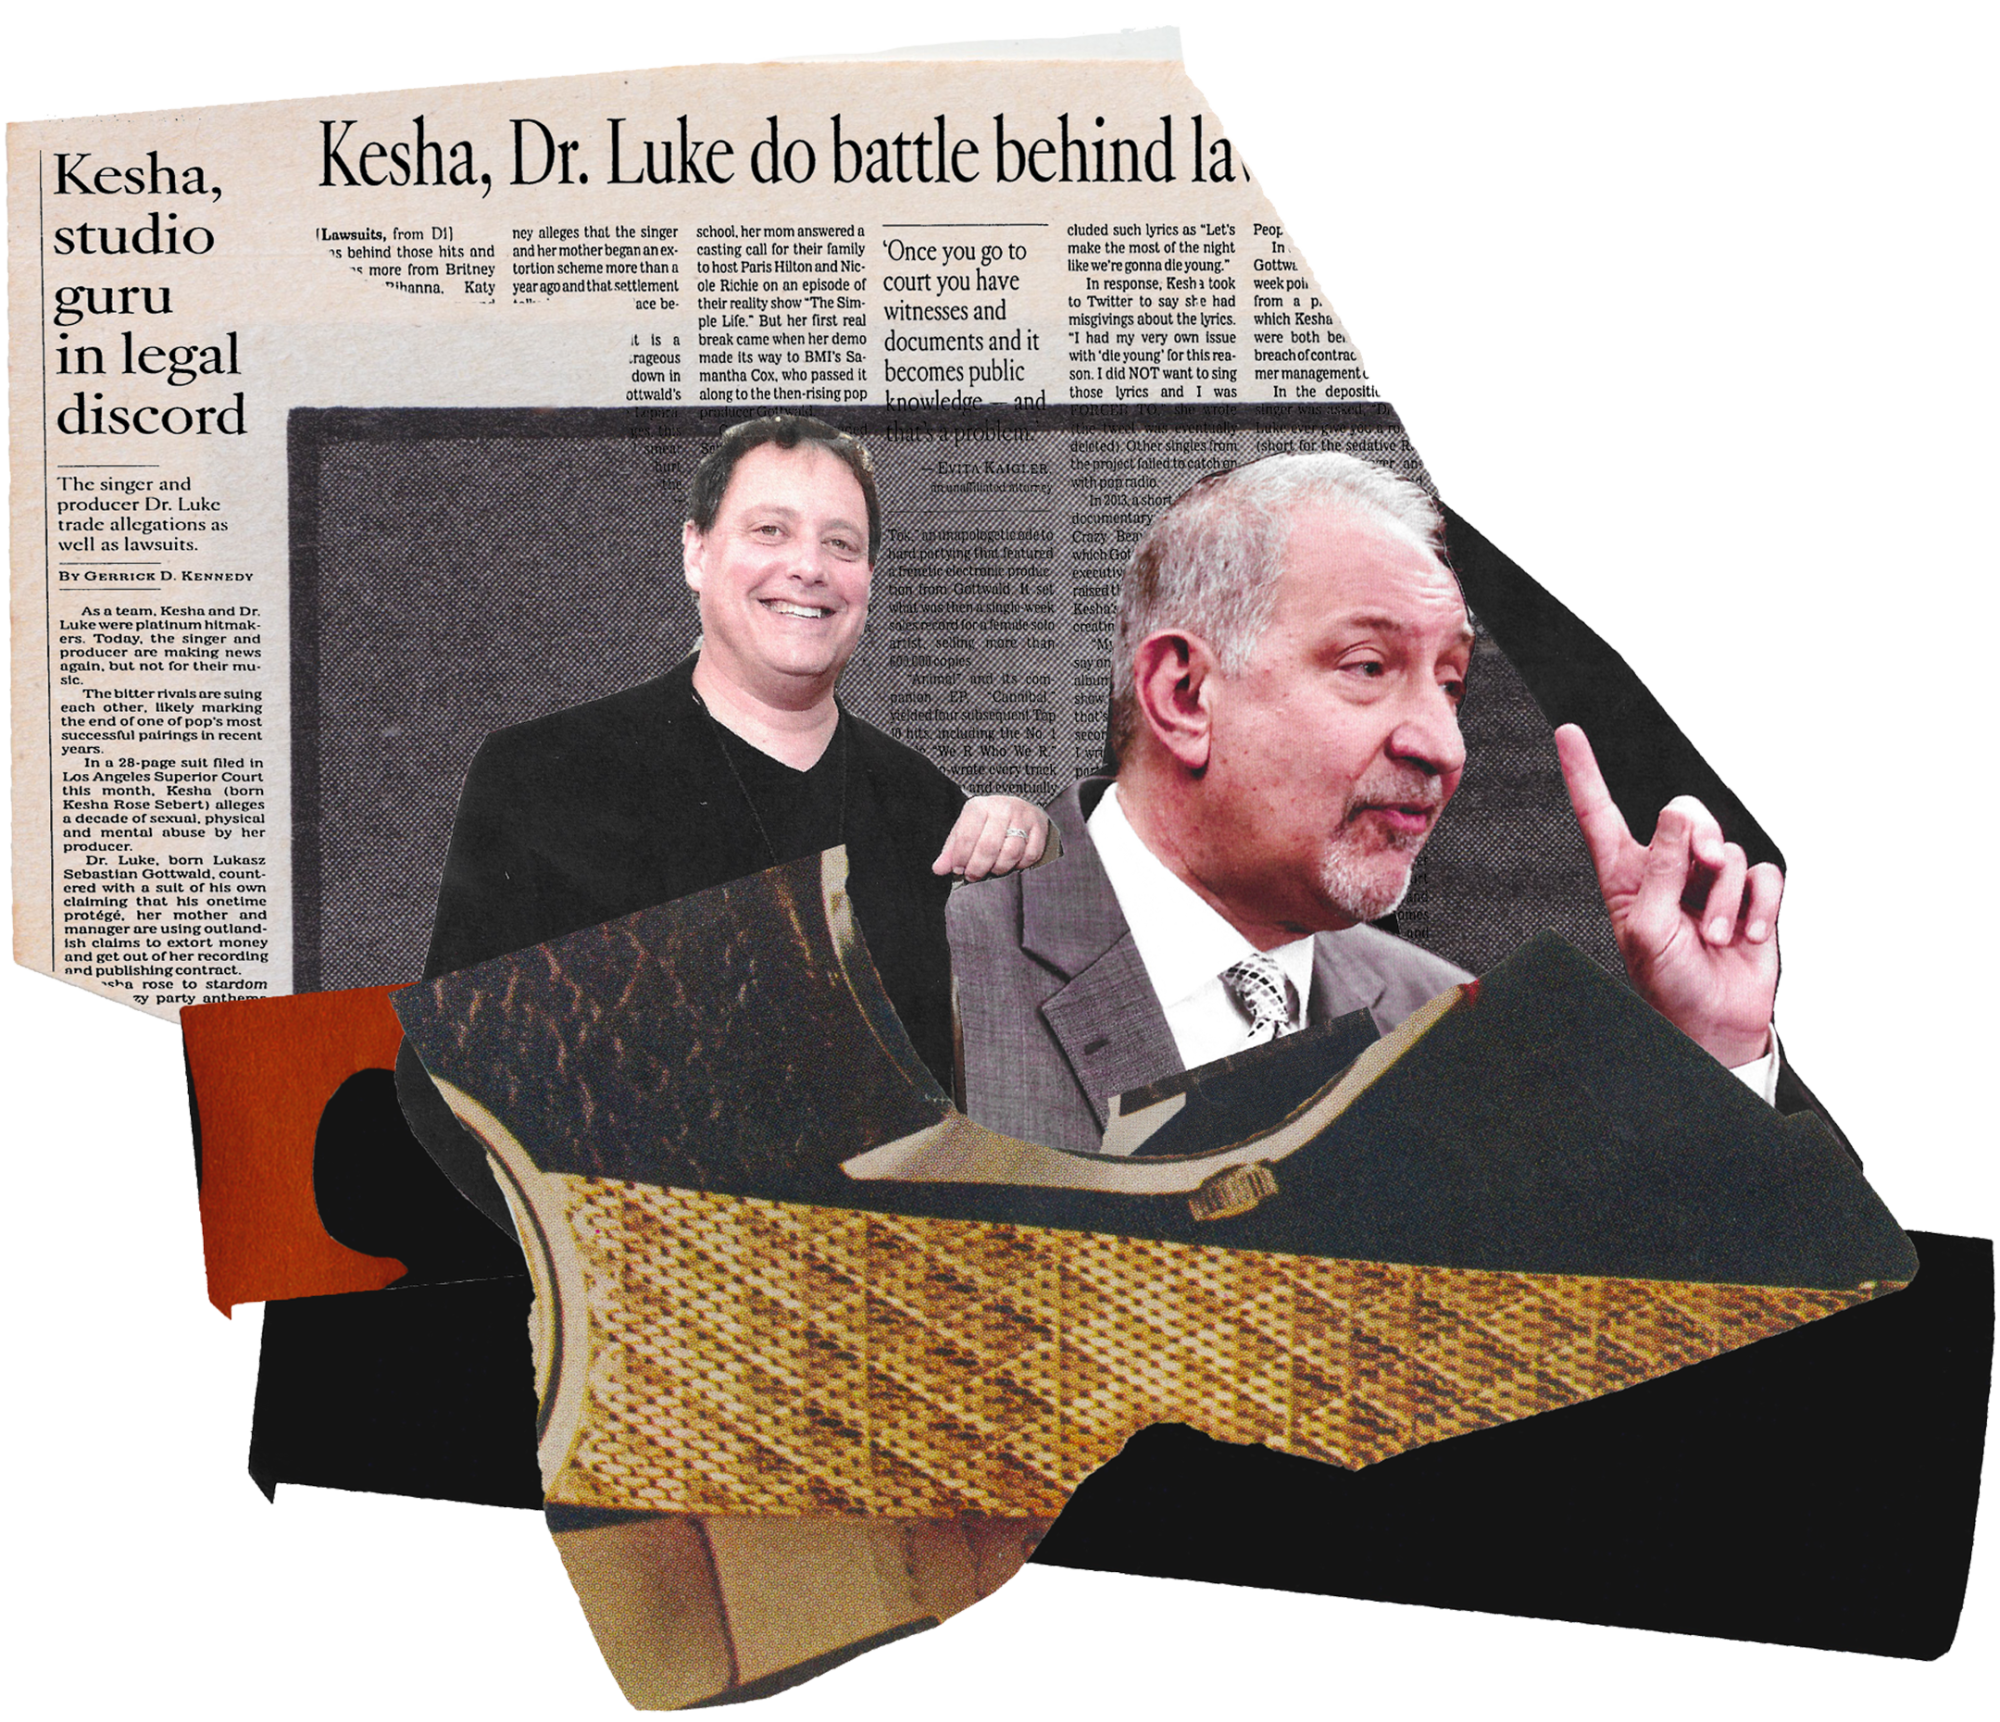 Pieces of photos of Kenny Meiselas and Mark Geragos atop a scanned newspaper page with headline "Kesha, Dr. Luke do battle"